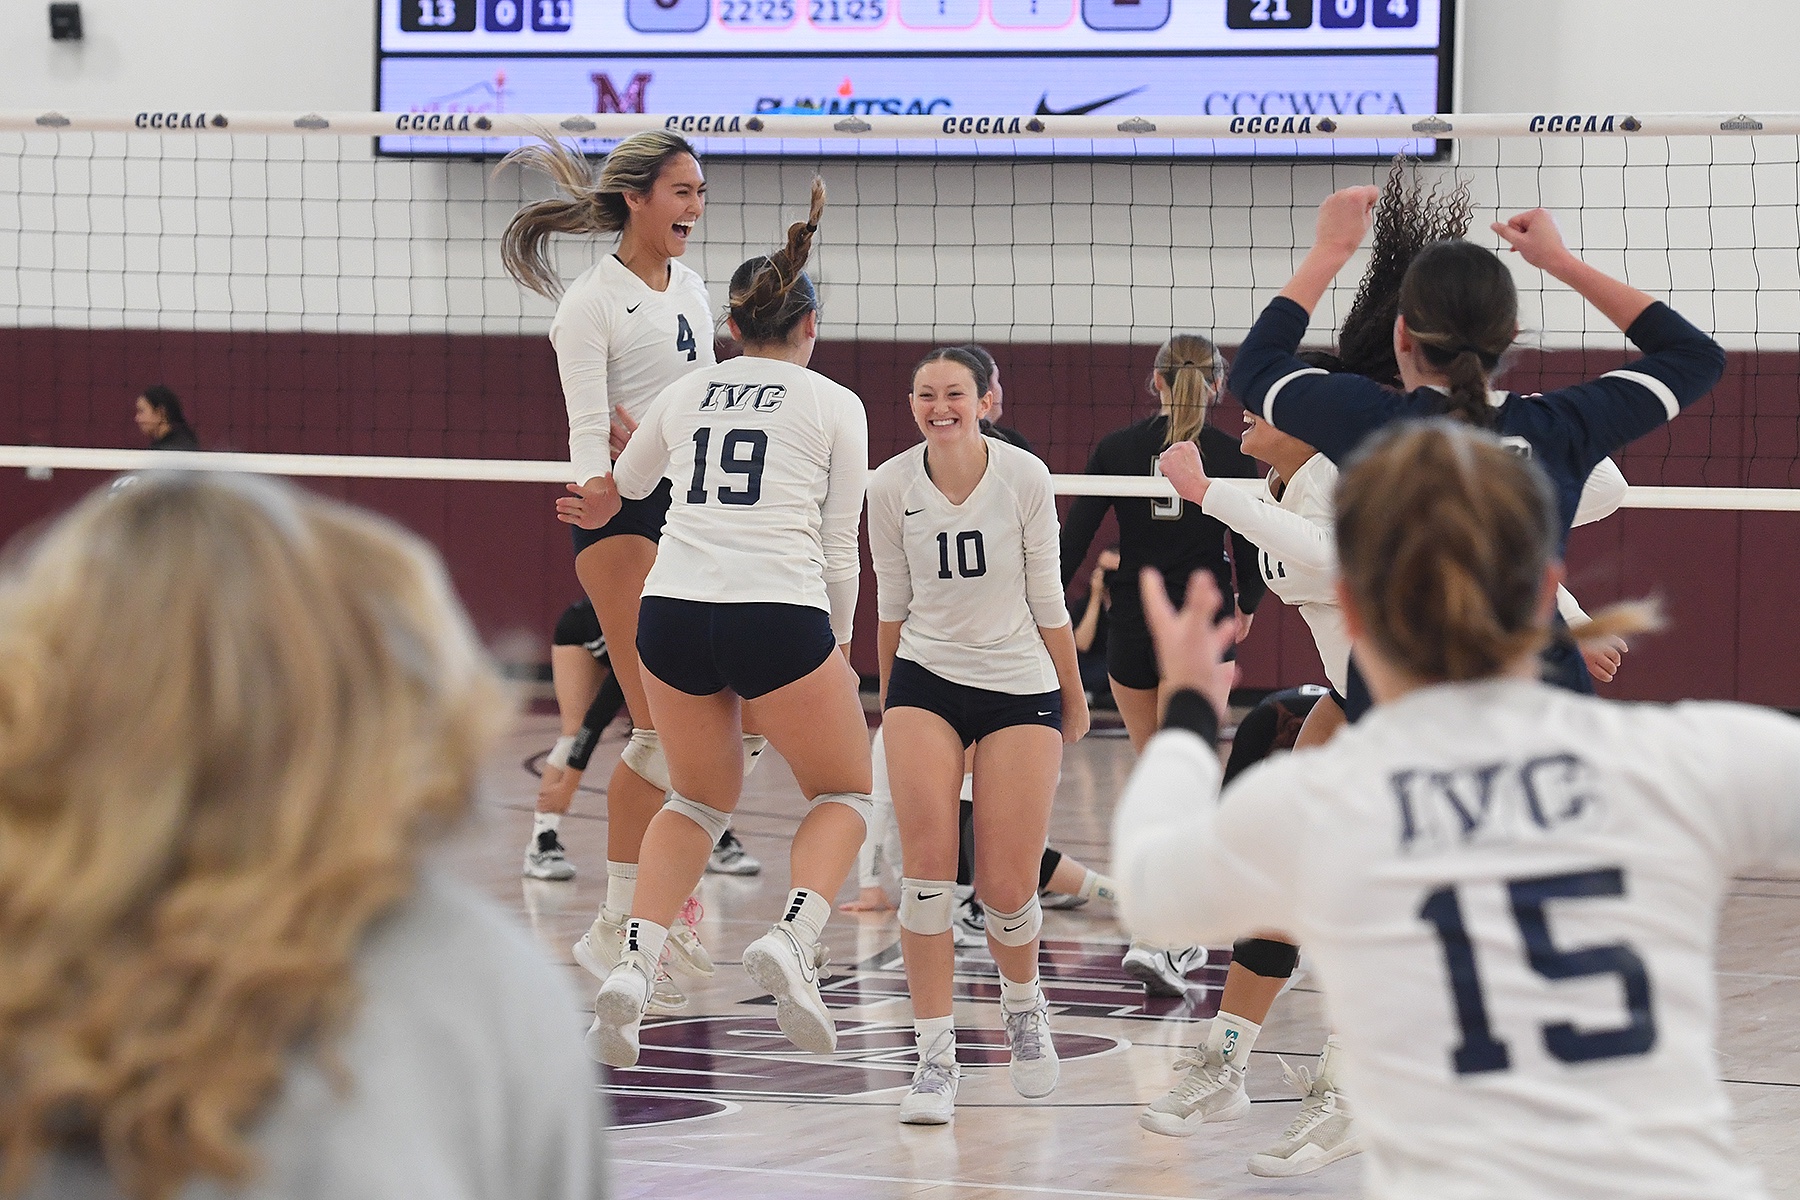 Volleyball team pulls off stunner to move into state semis